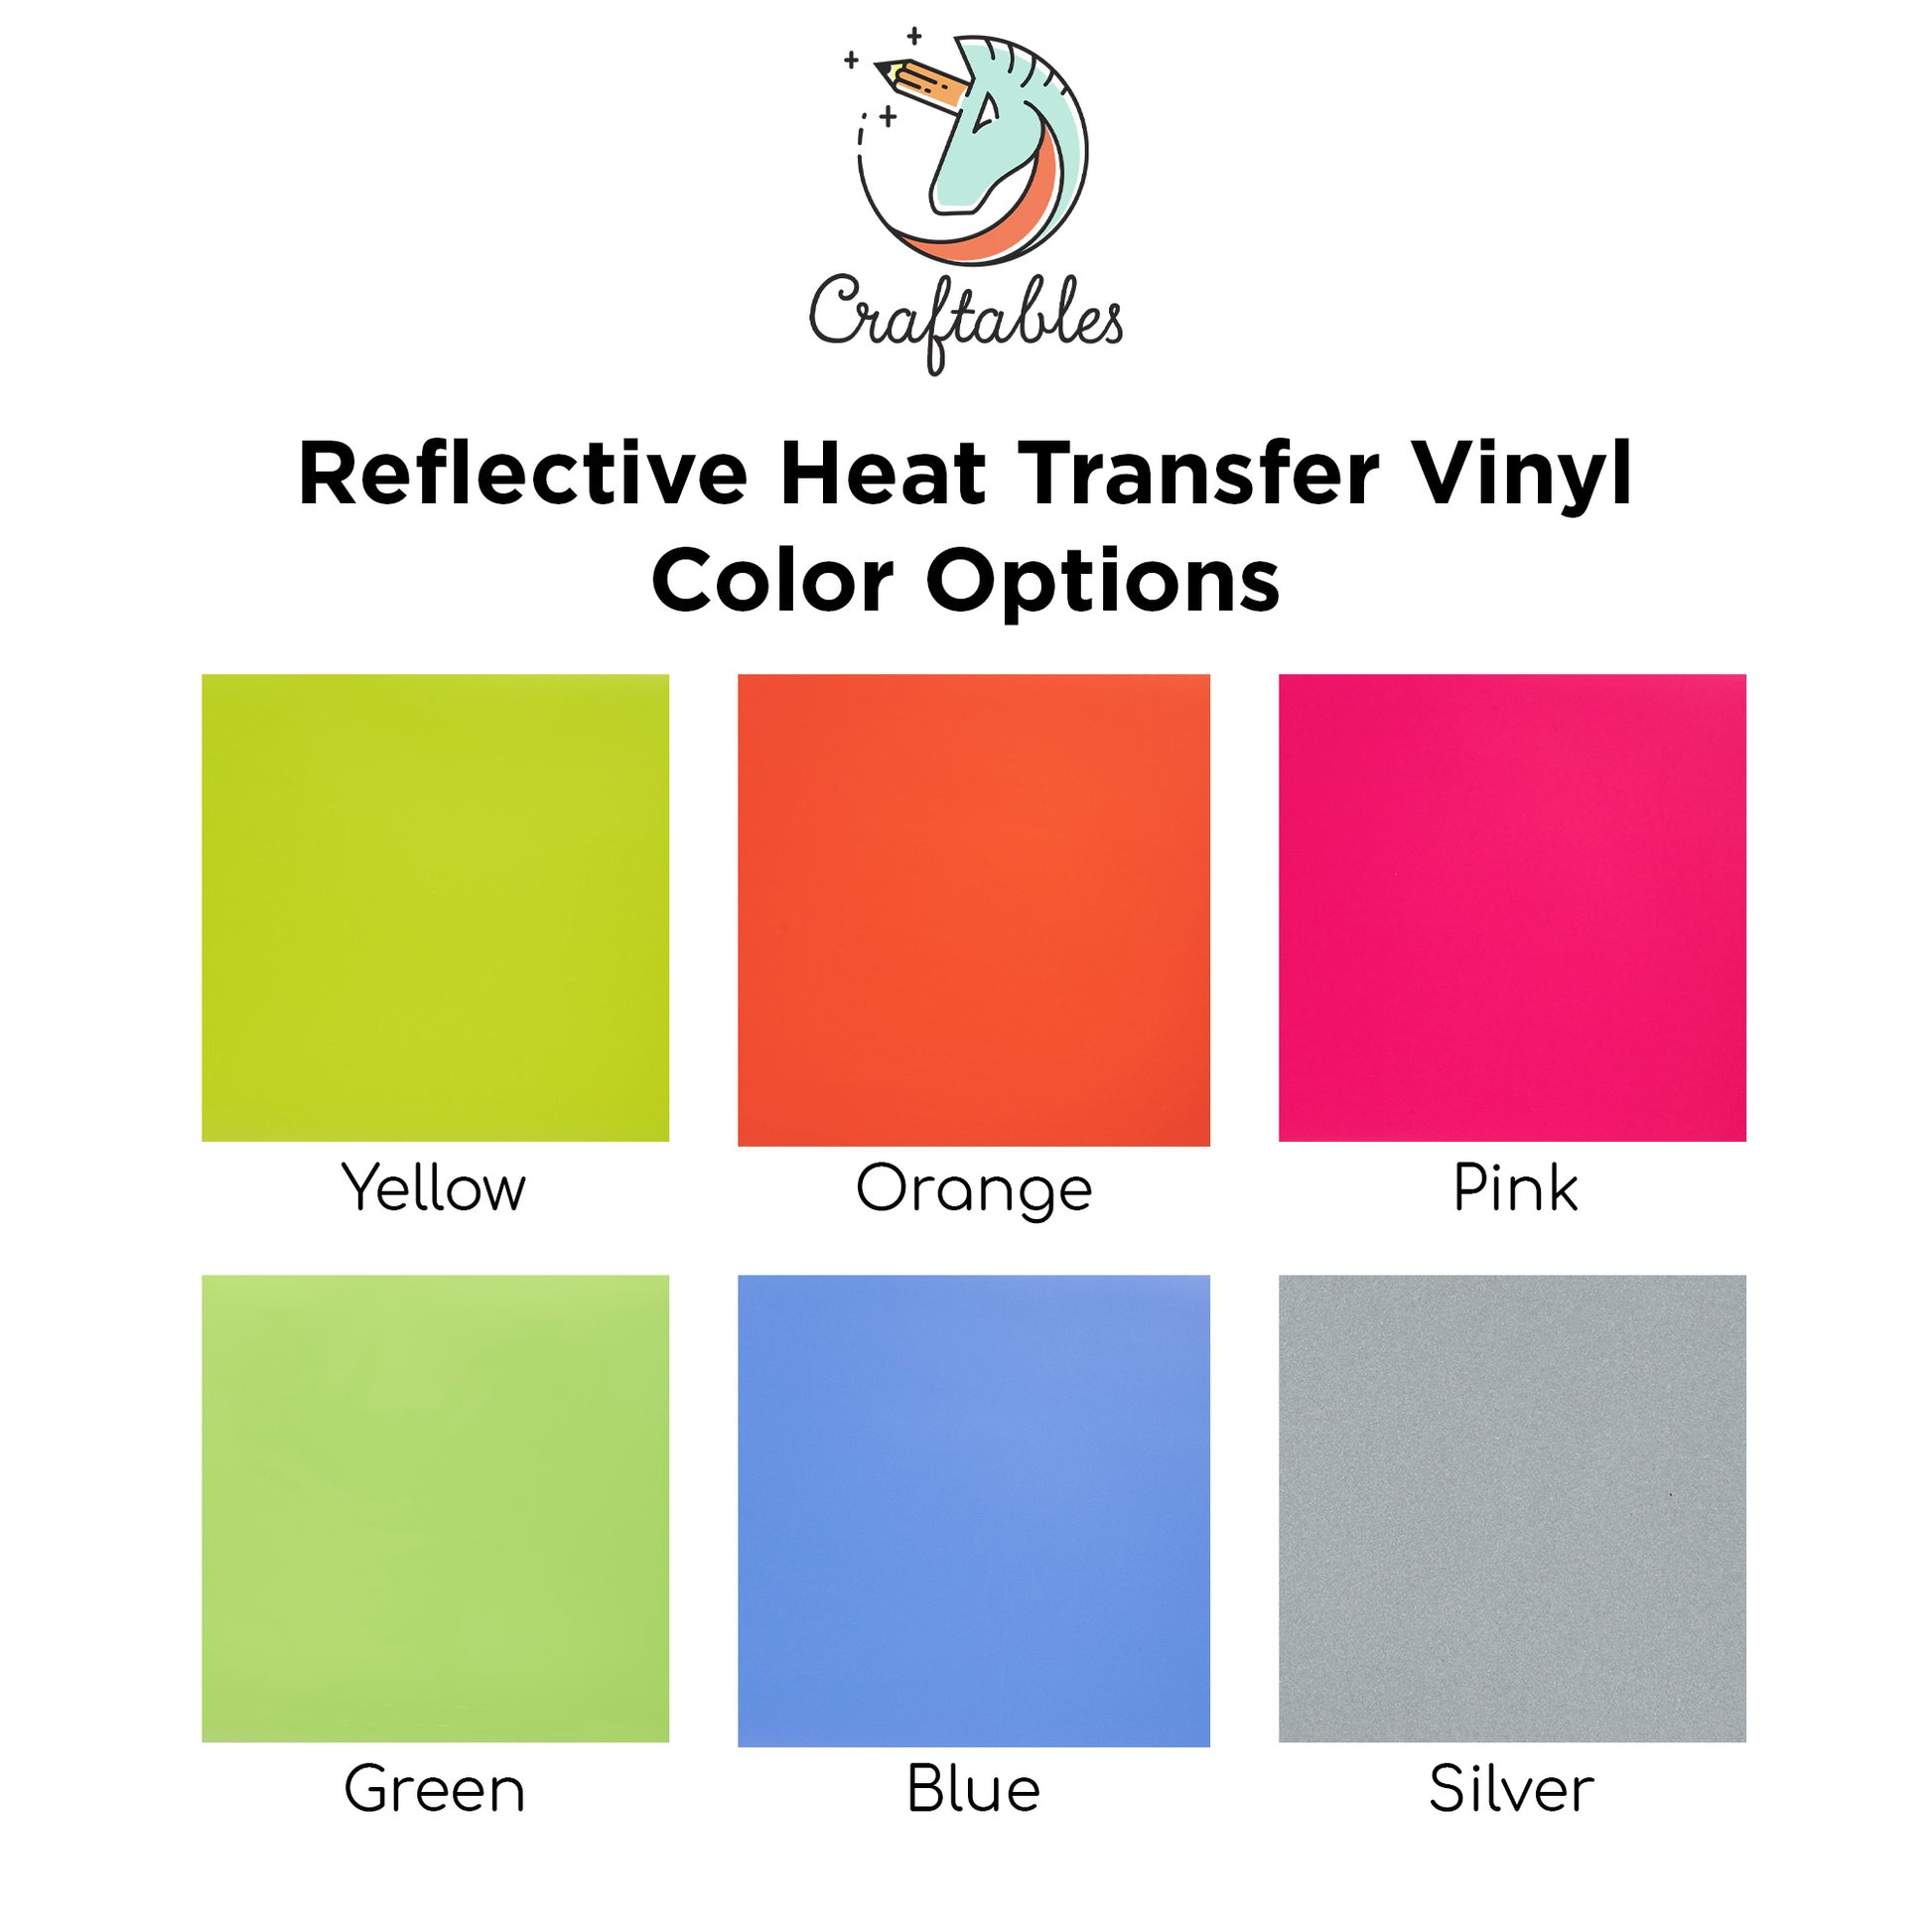 White Puff Heat Transfer Vinyl Sheets By Craftables – shopcraftables